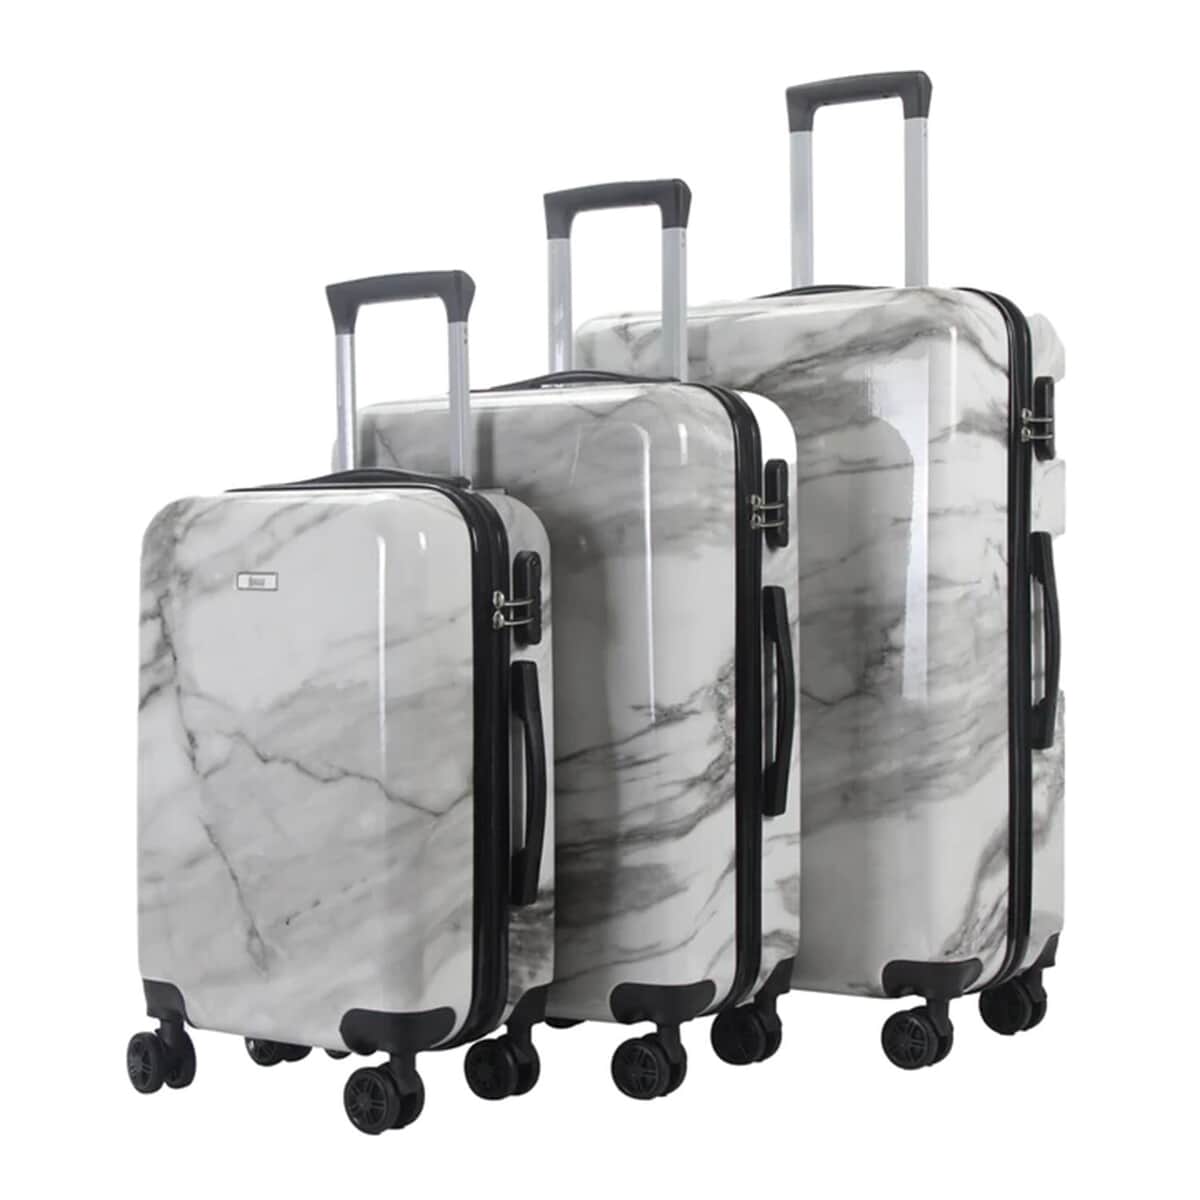 Mirage-Tanya 3 Piece White Marble    Luggage Set with 360 Dual Spinning Wheels and Combo Lock (28" 24", 20") image number 4